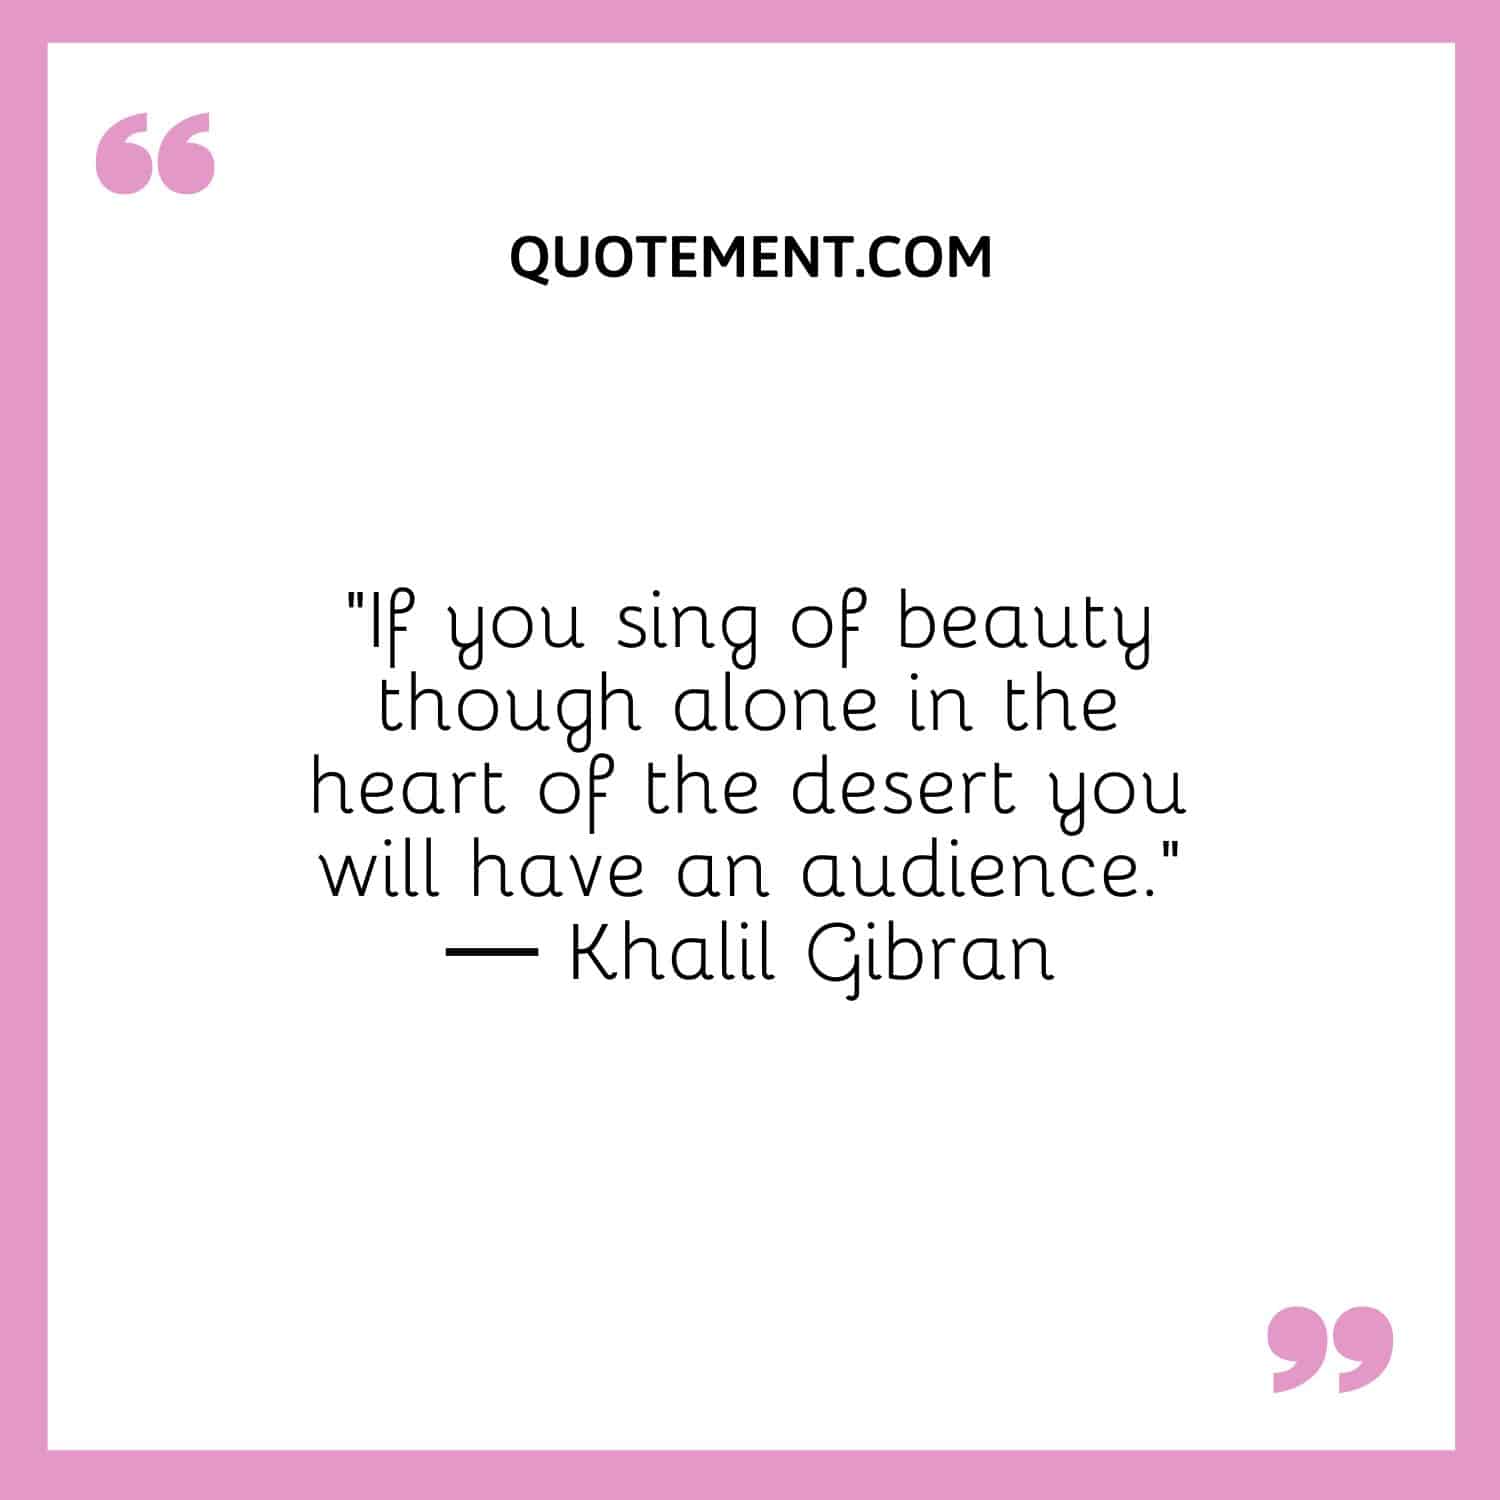 If you sing of beauty though alone in the heart of the desert you will have an audience